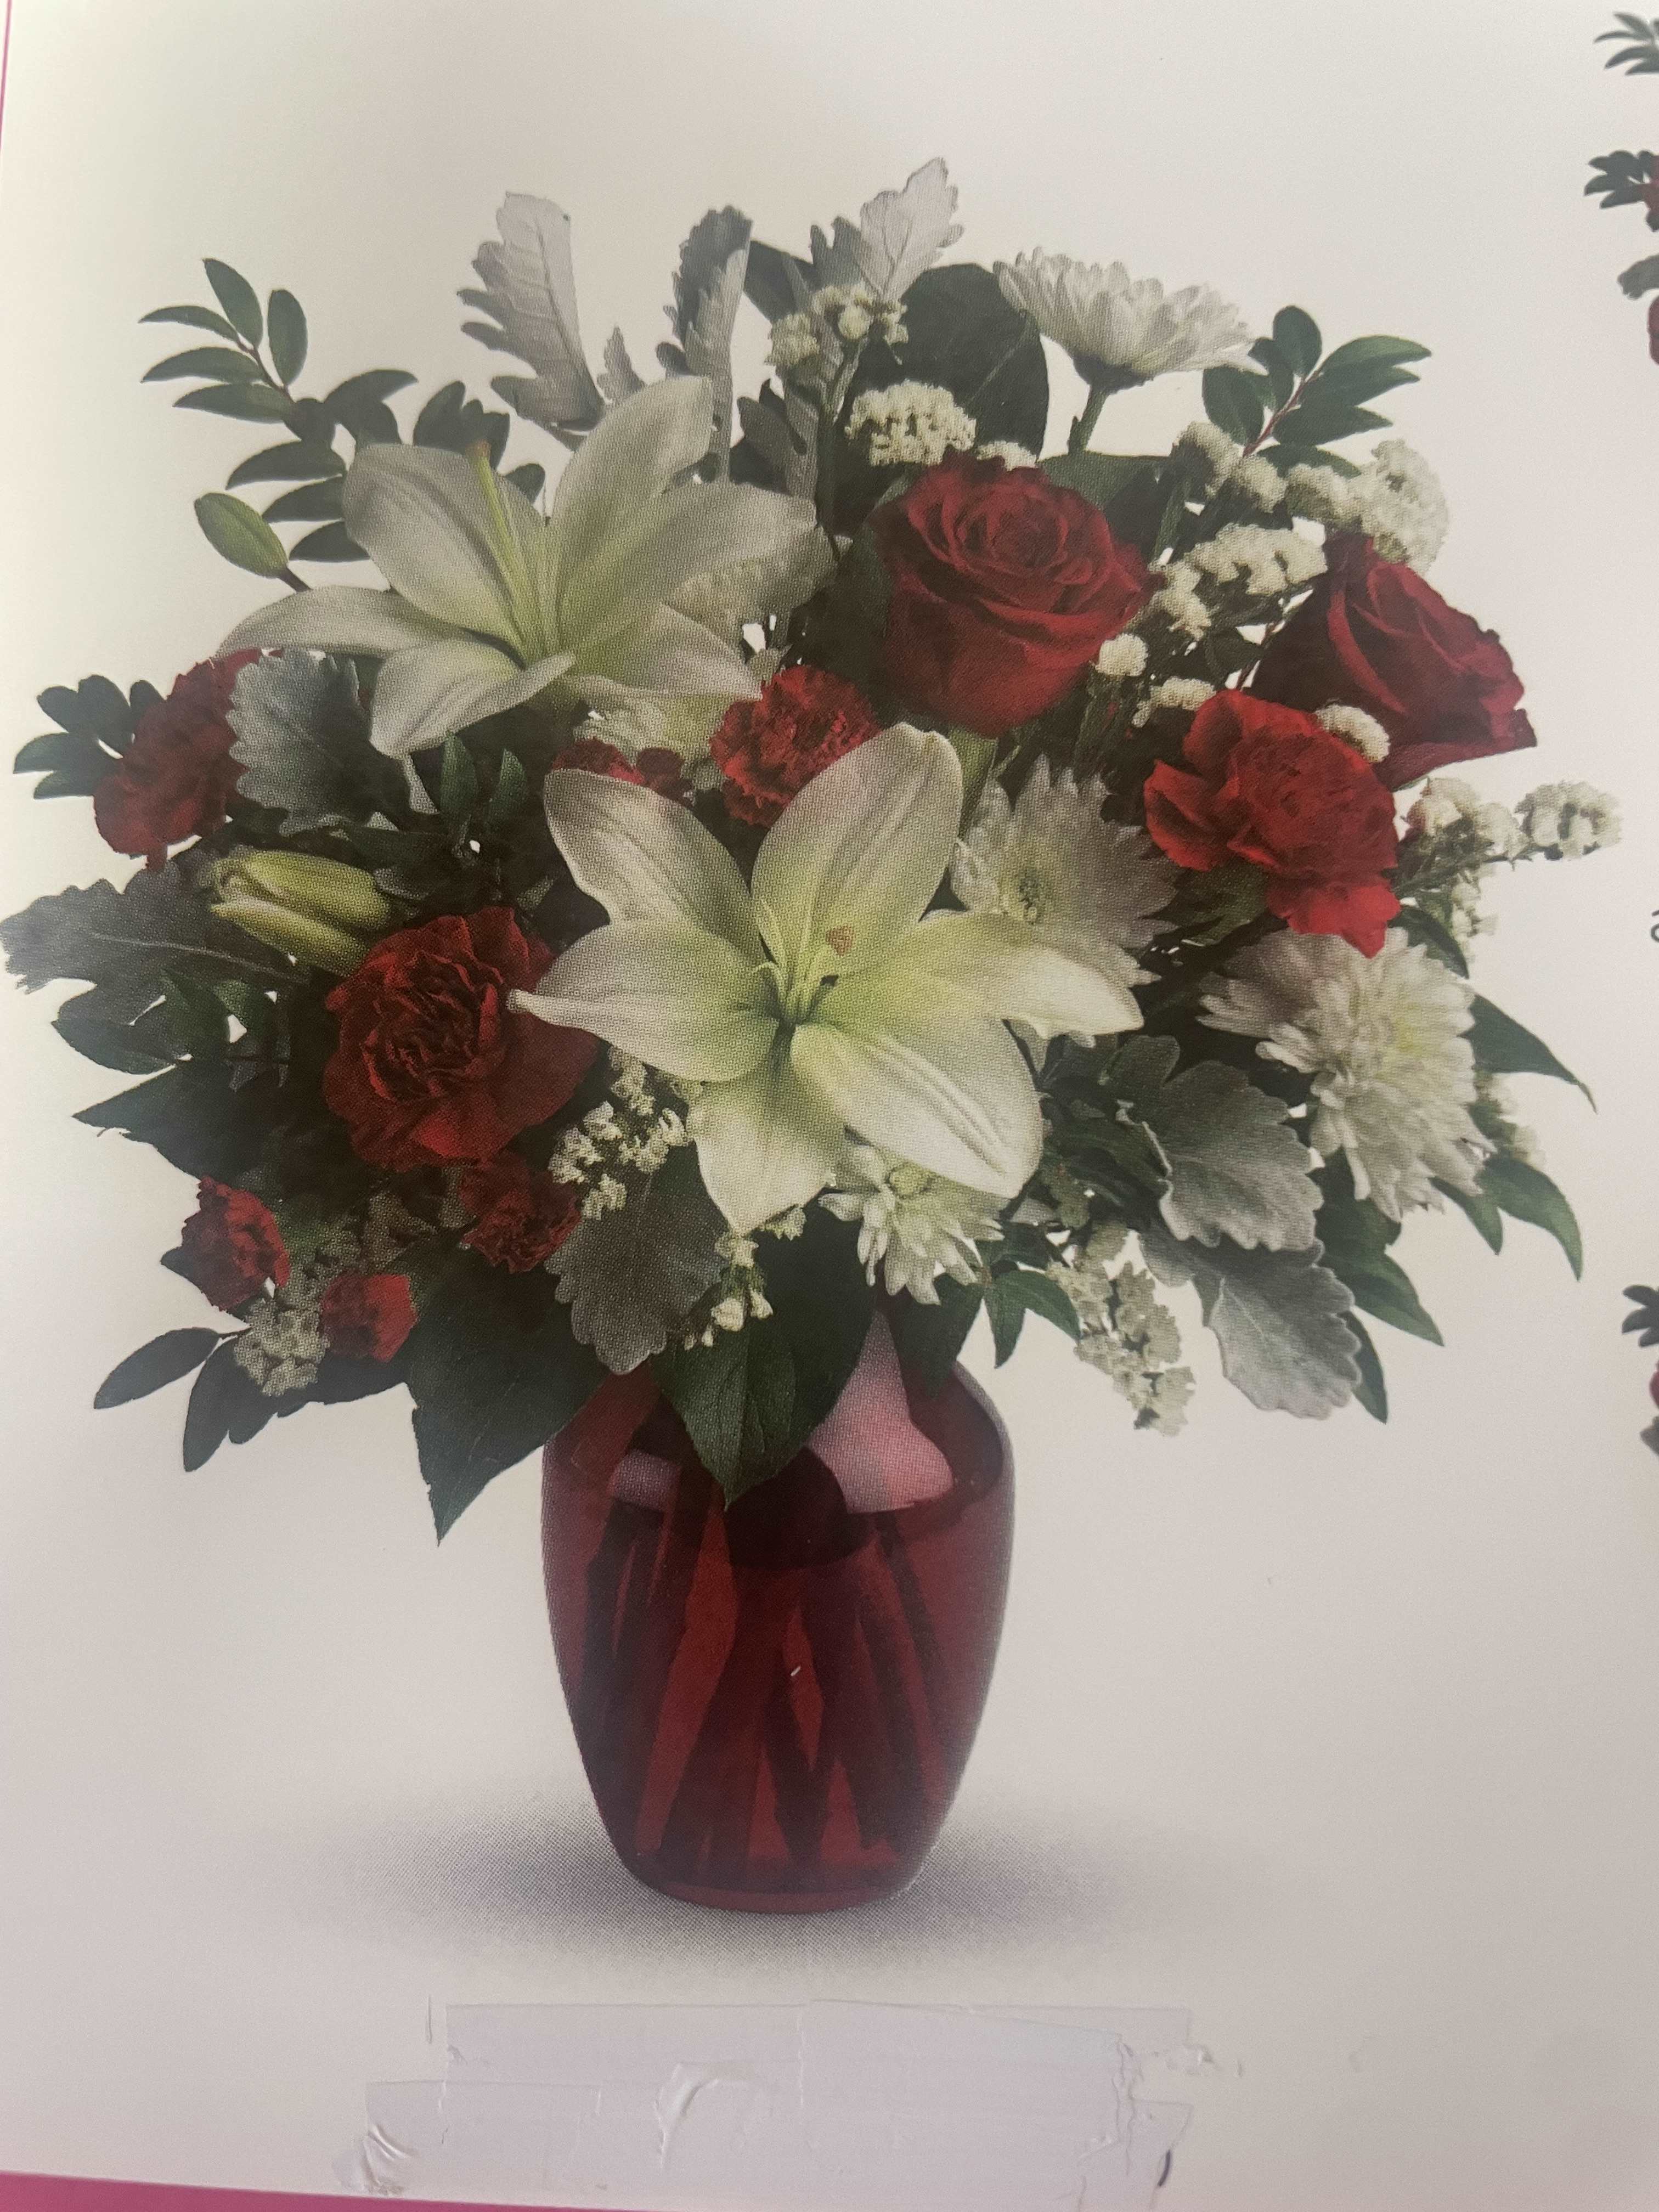 Love and Roses - This beautiful bouquet is great for Valentine's Day and your someone special.  Flowers and foliage are roses, carnations, lilies, chrysanthemums, huckleberry, lemon leaf, and others. Standard price is 79.99.  Custom made arrangements are higher prices.  We have them in premium and deluxe. For custom made arrangements please call the store. Seasonal flowers and foliage will be substituted.  